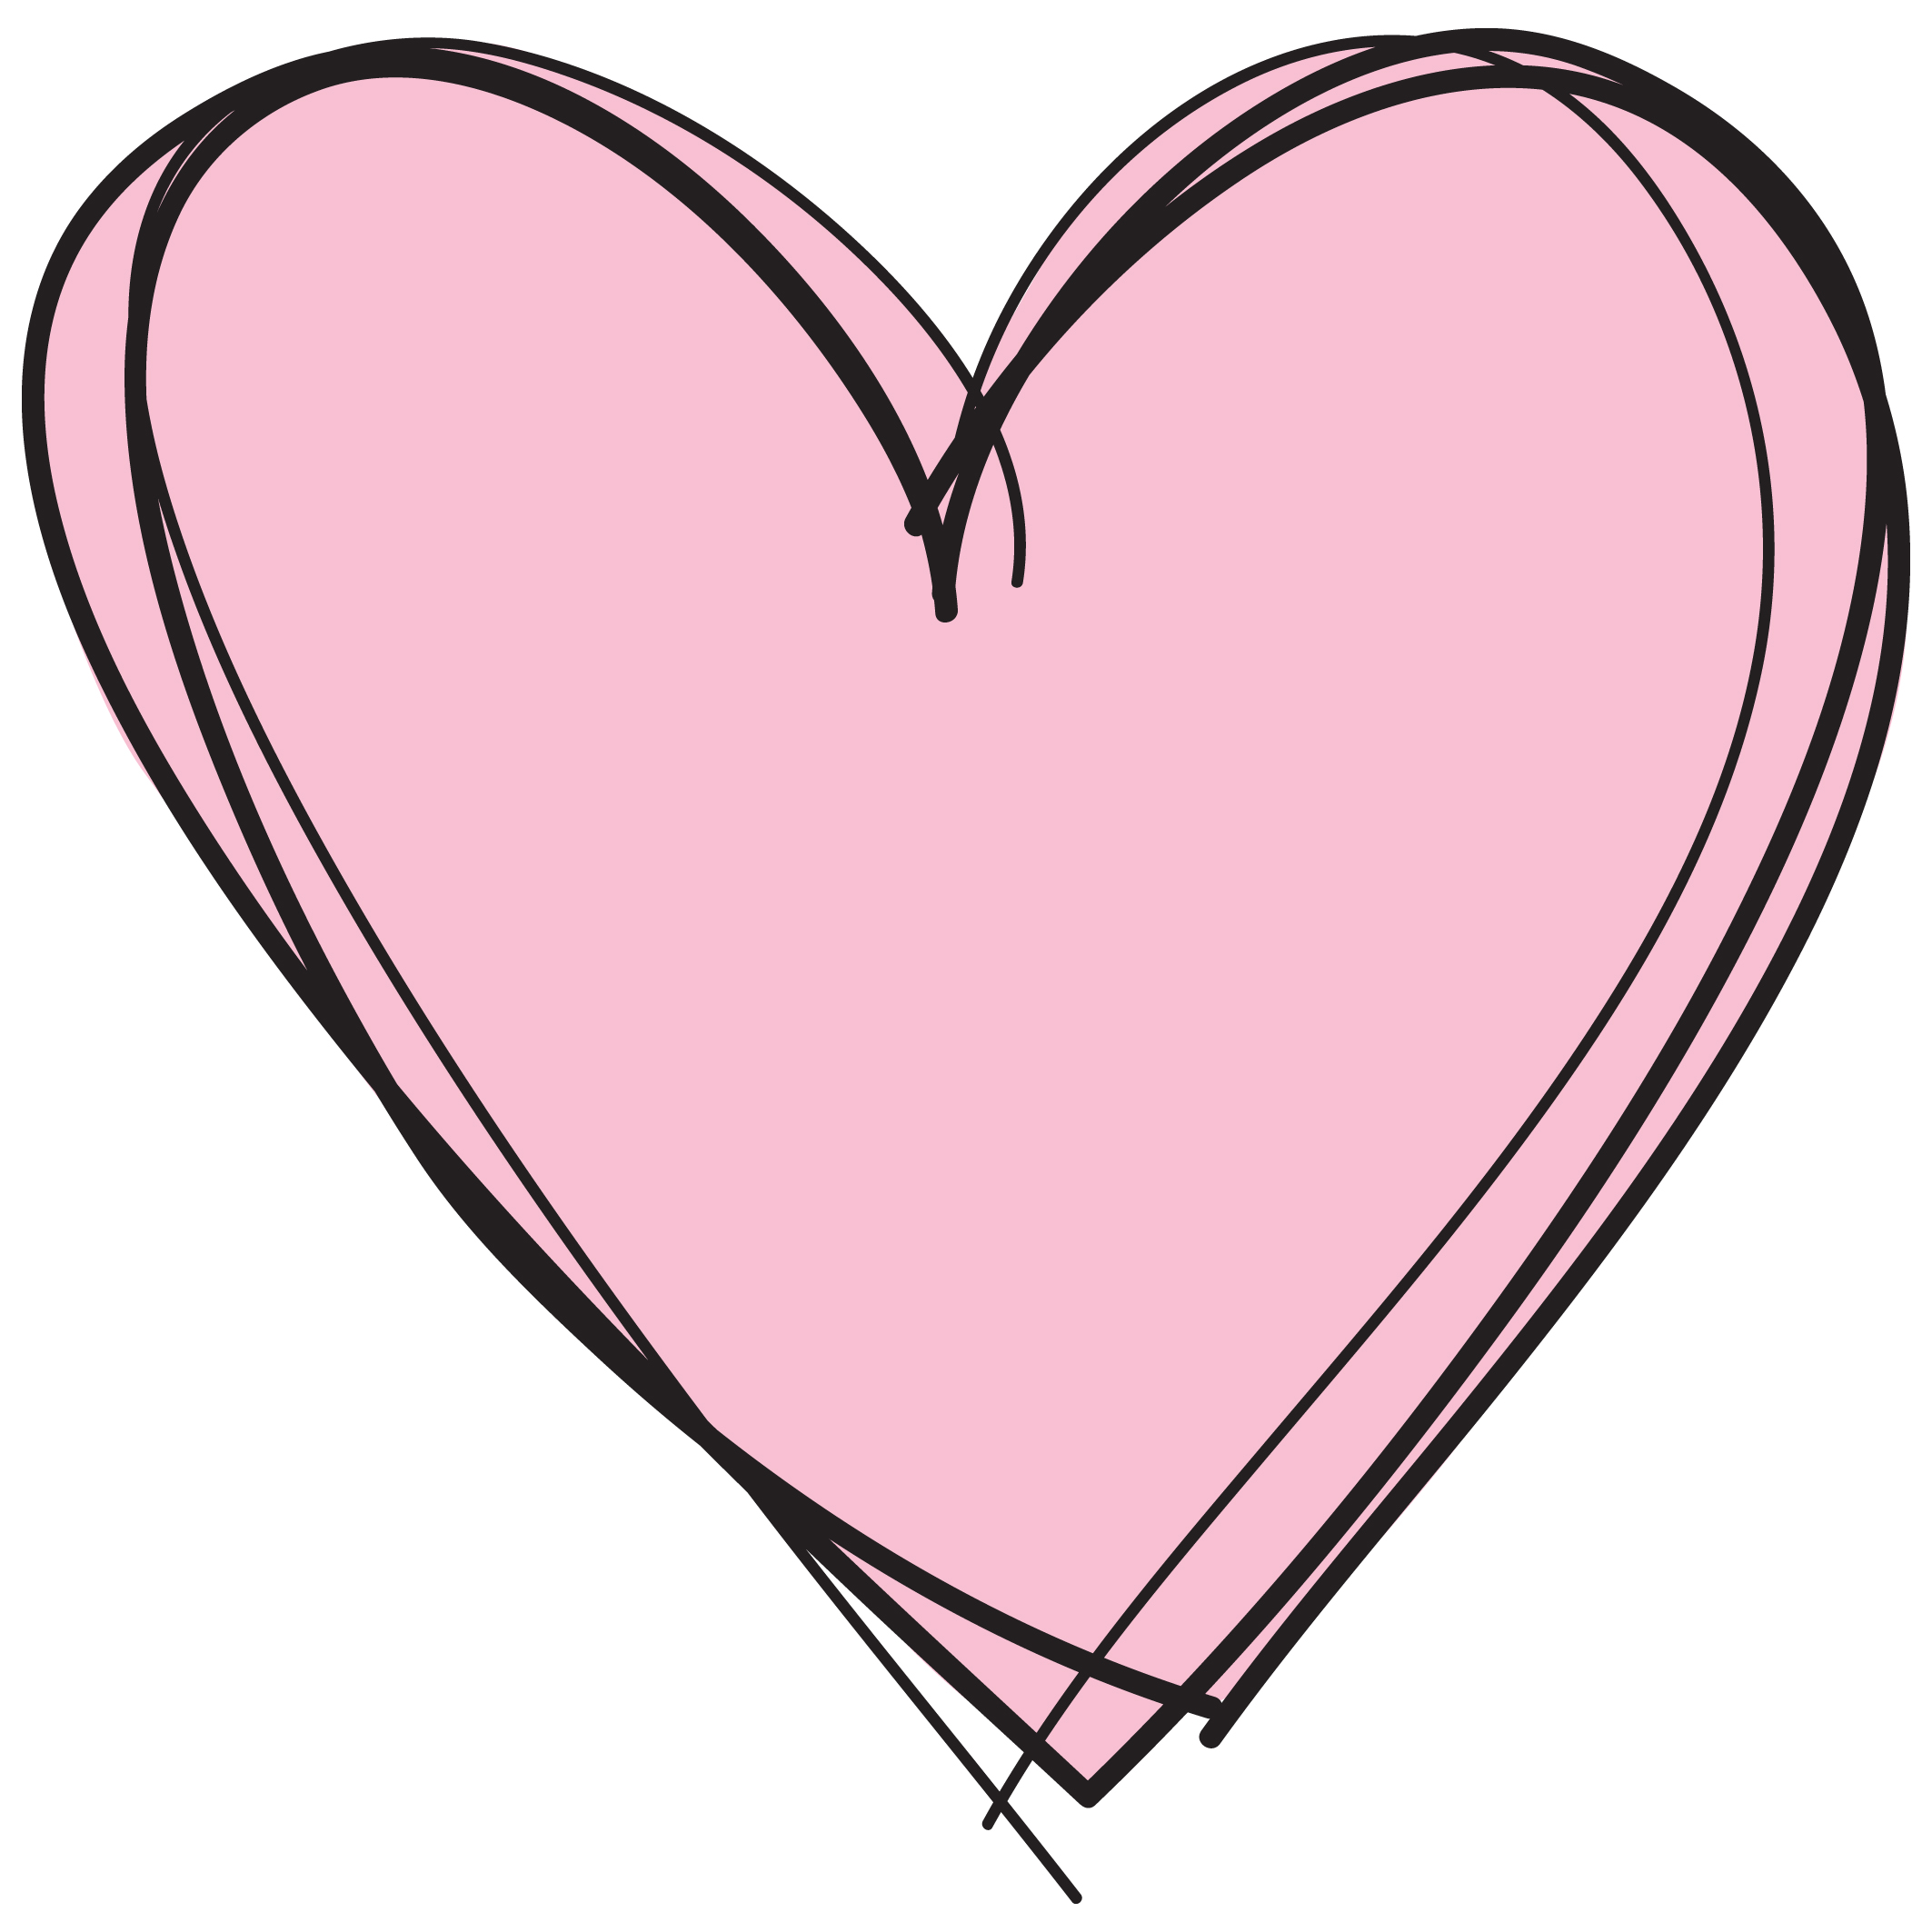 Pink Heart Outline Clipart | Clipart library - Free Clipart Images